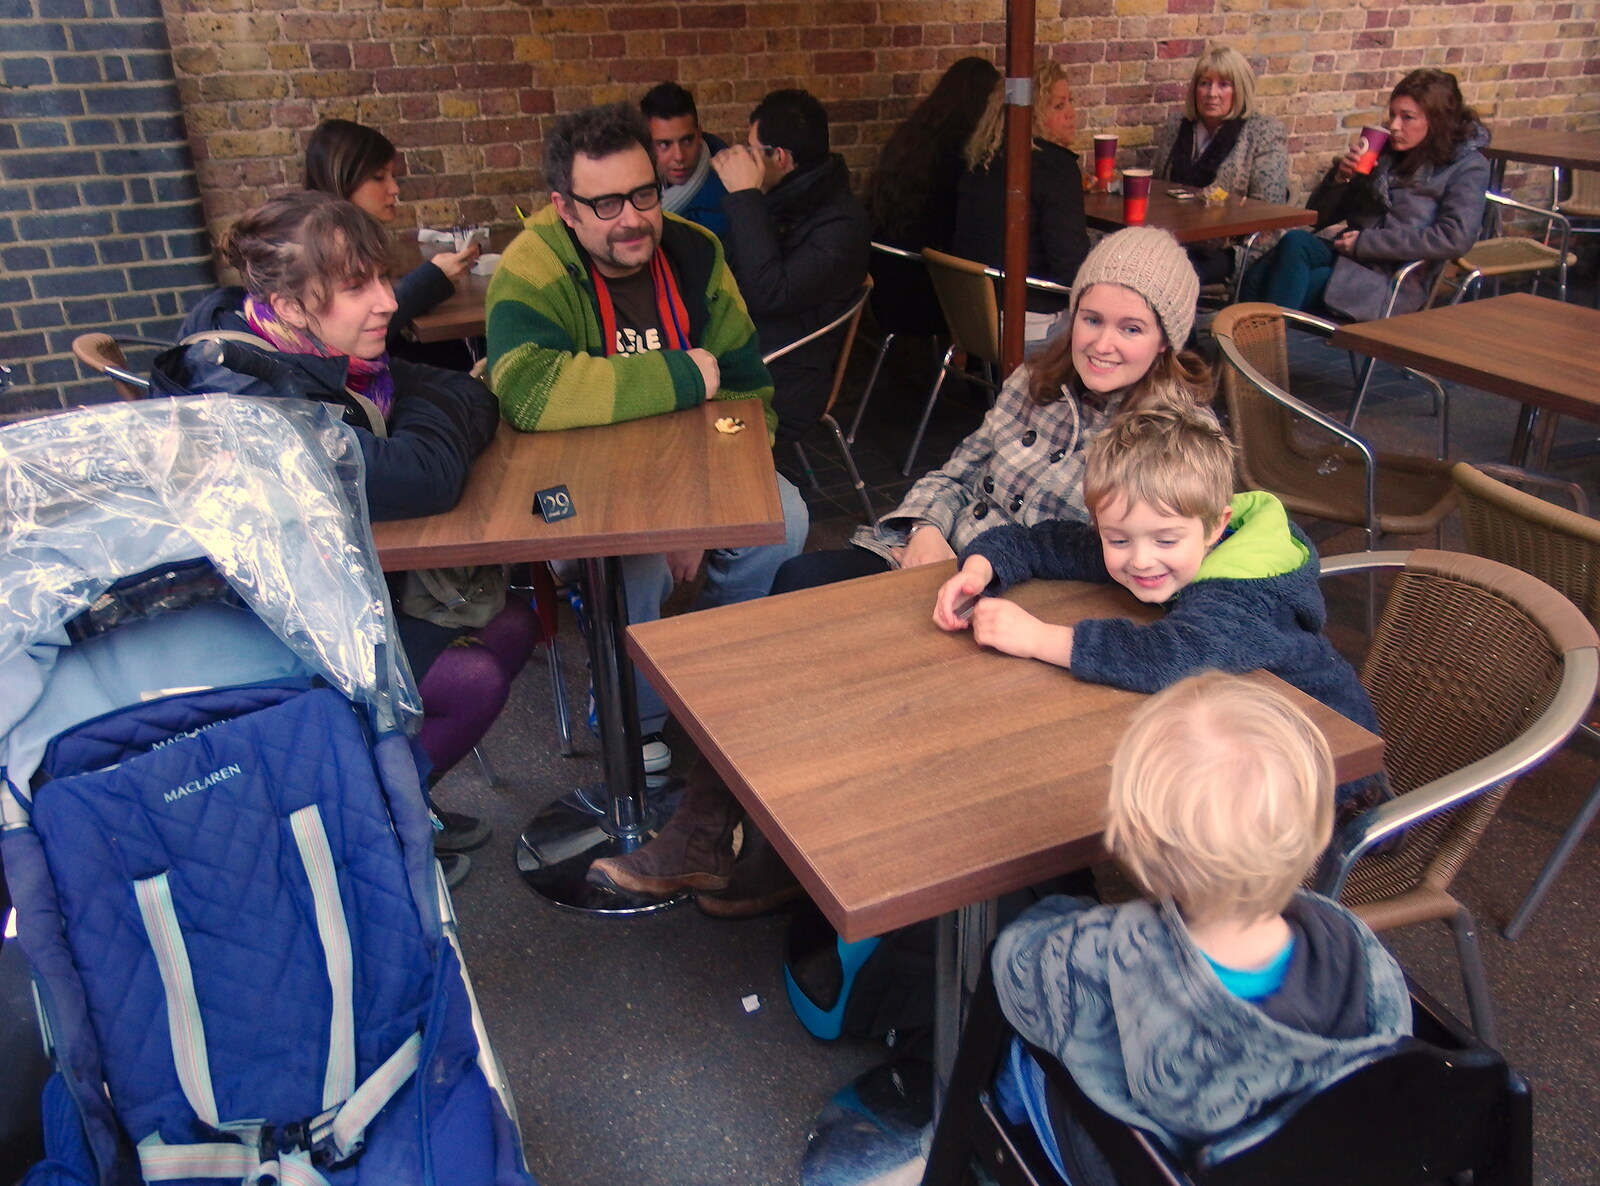 We hang out with Noddy and Gilly from Lunch in the East End, Spitalfields and Brick Lane, London - 1st December 2013